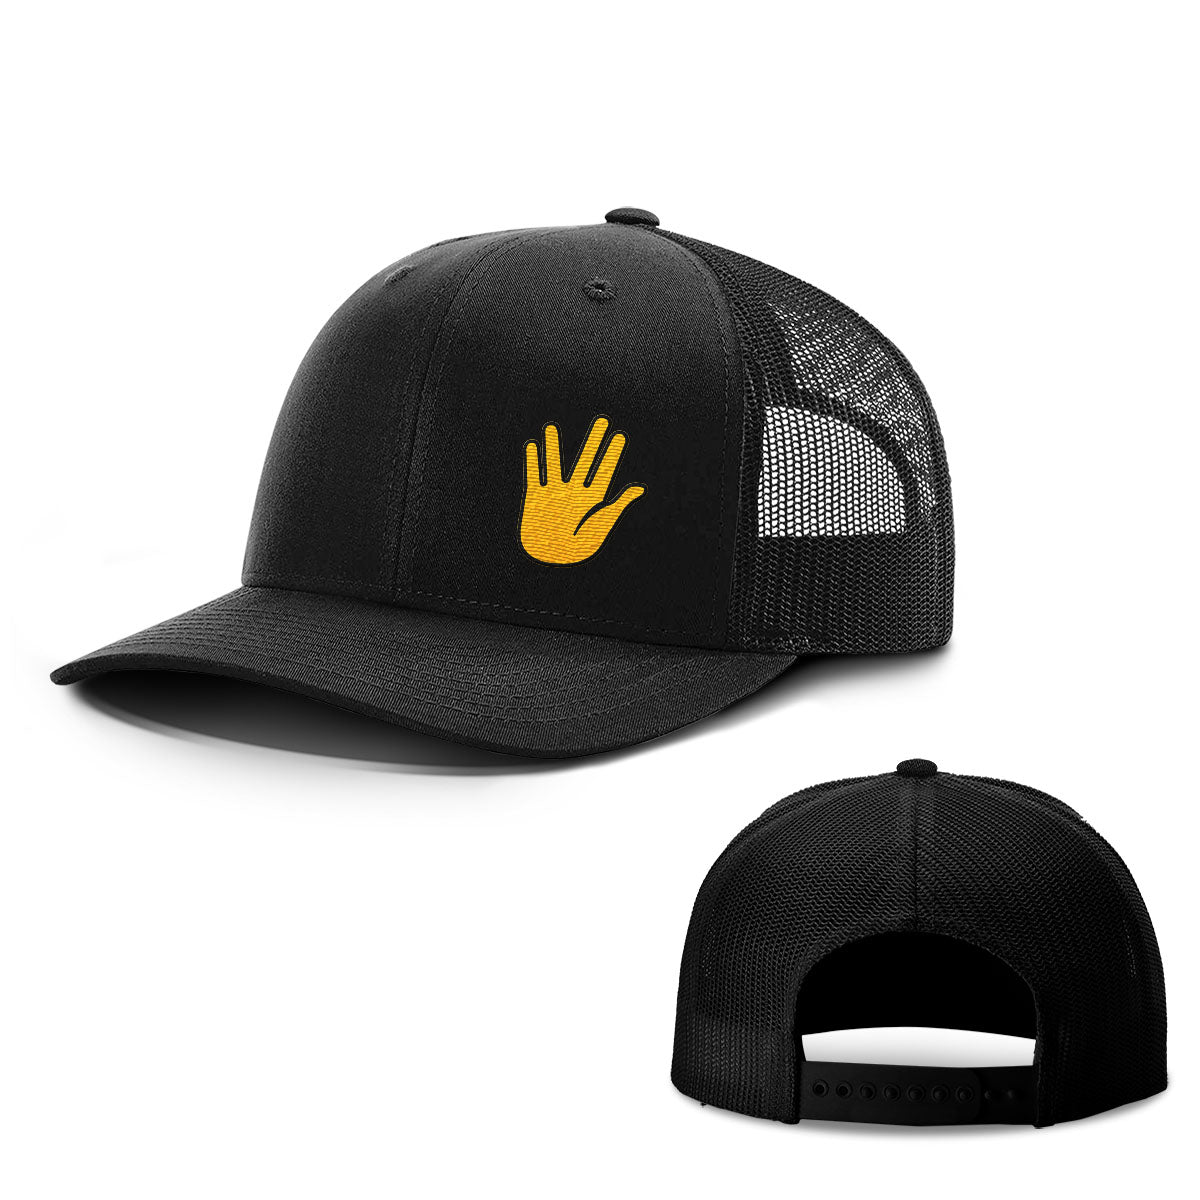 Live Long Hats - BustedTees.com